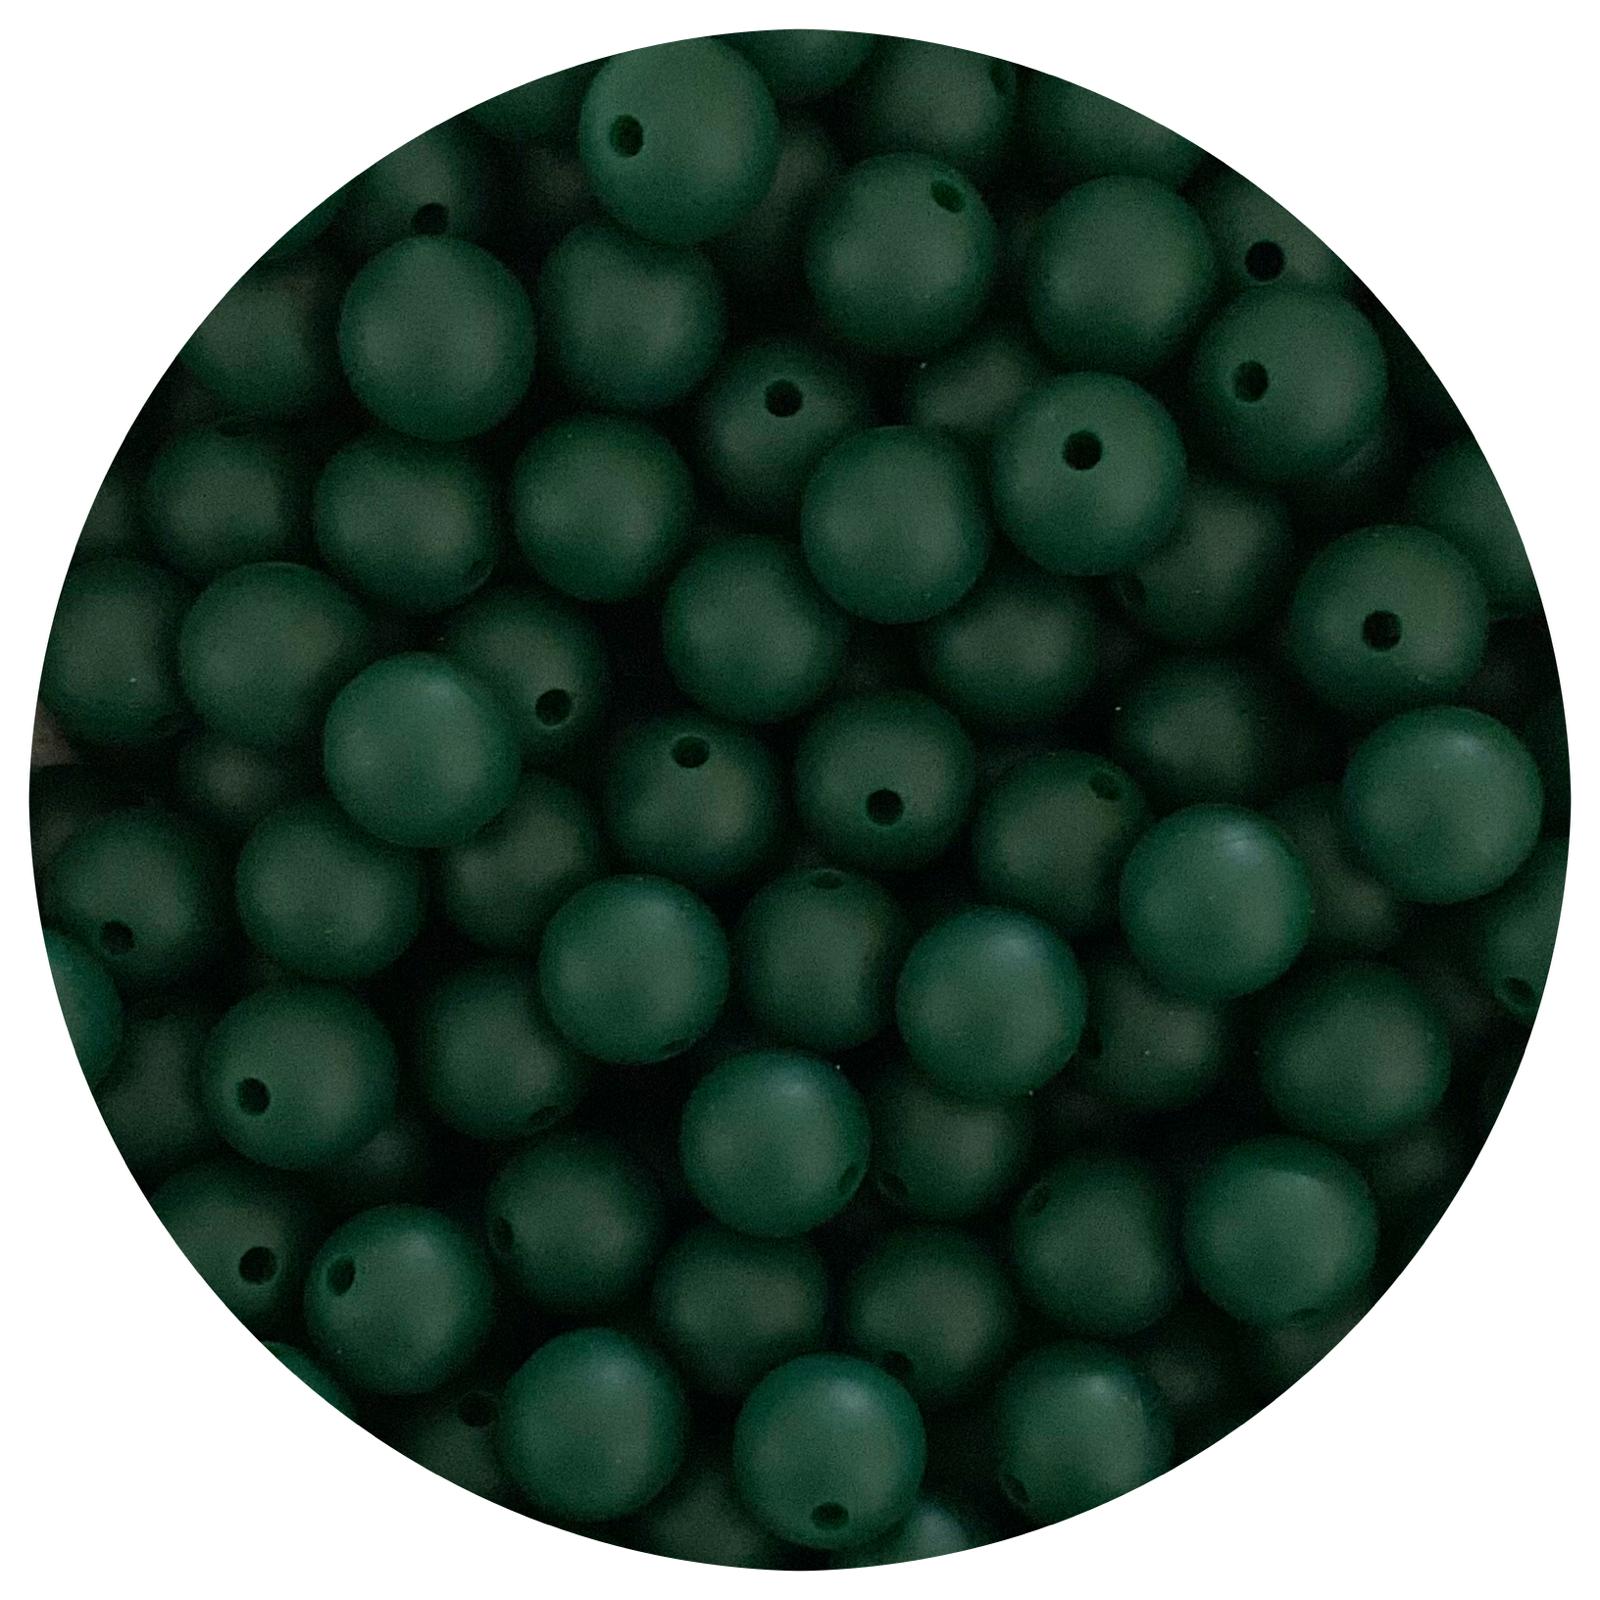 Forest Green - 12mm Round Silicone Beads - 10 beads